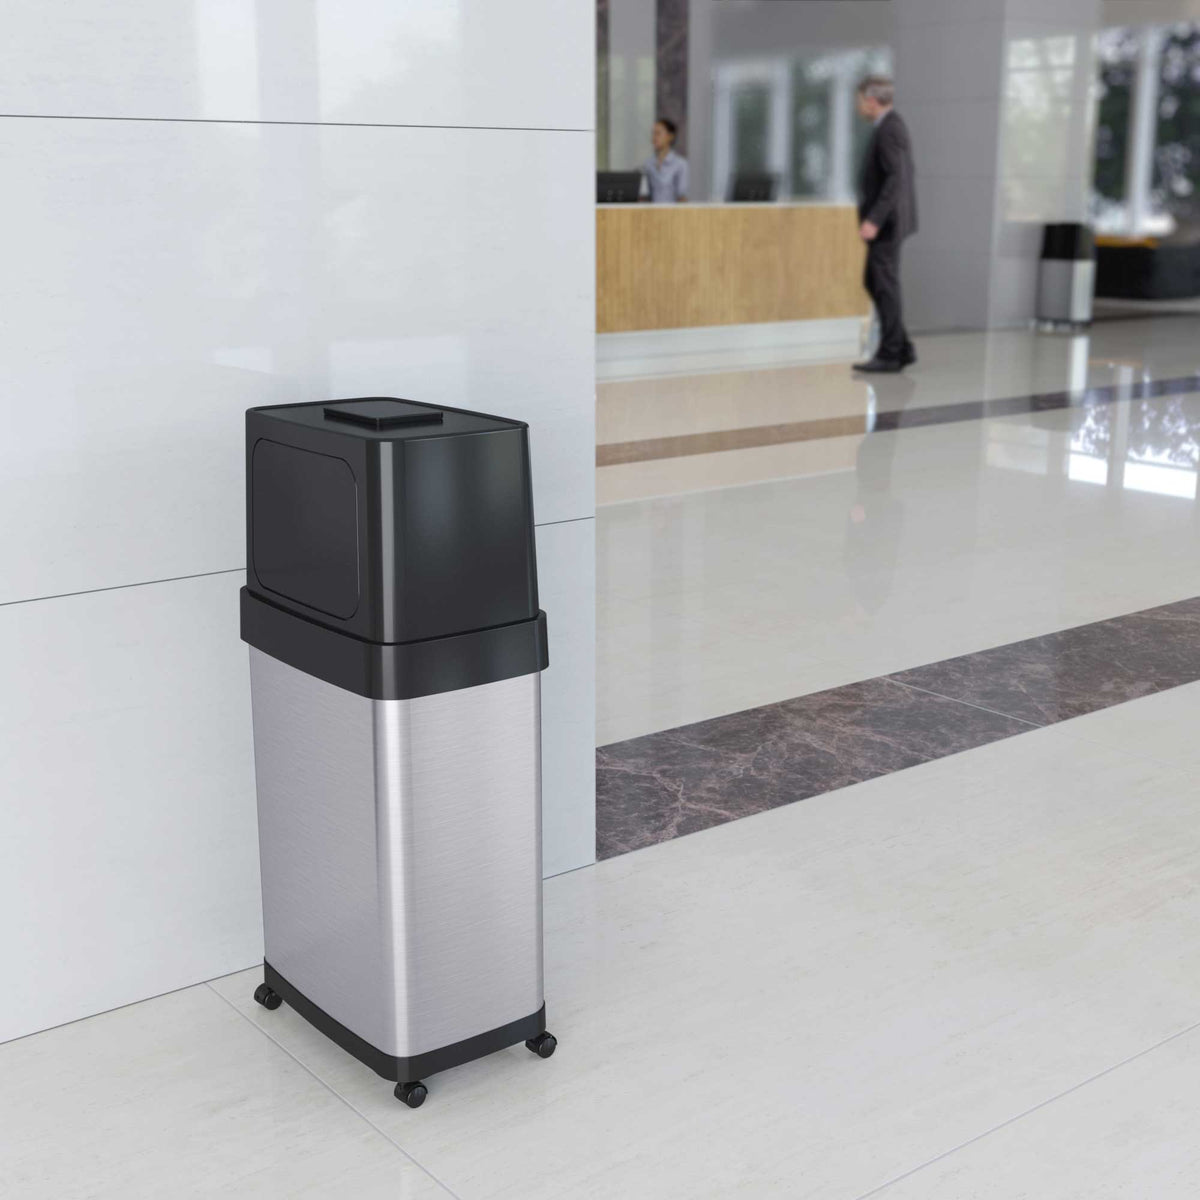 18 Gallon / 68 Liter Dual Push Door Trash Can with Wheels in office lobby